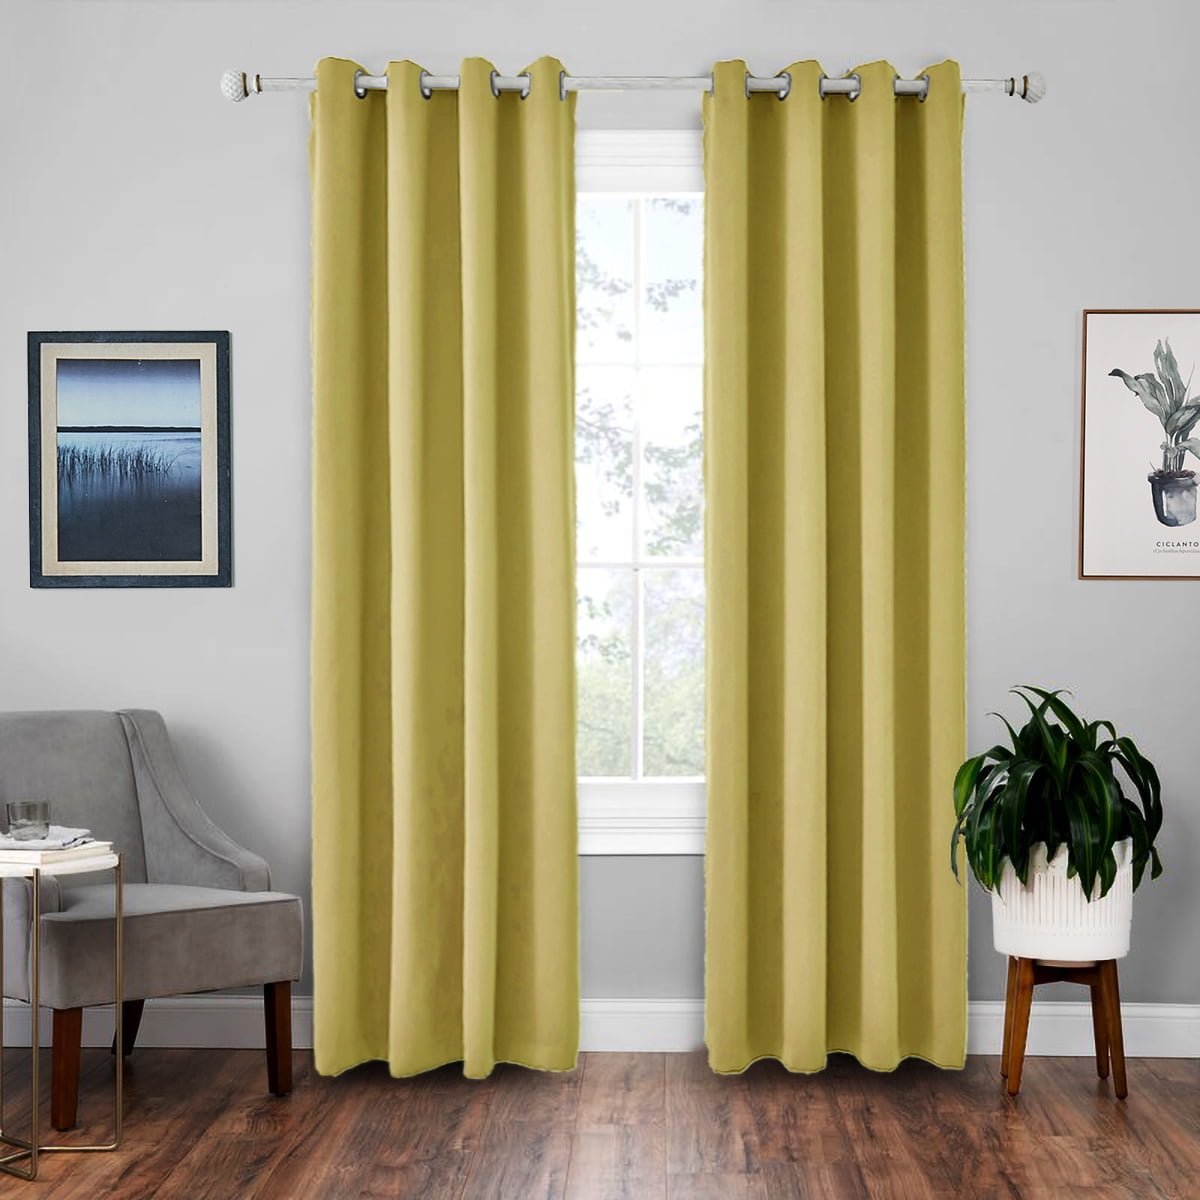 Details about   2 Panels Blackout Window Curtain Collection Light Blocking for Bedroom Room Gift 